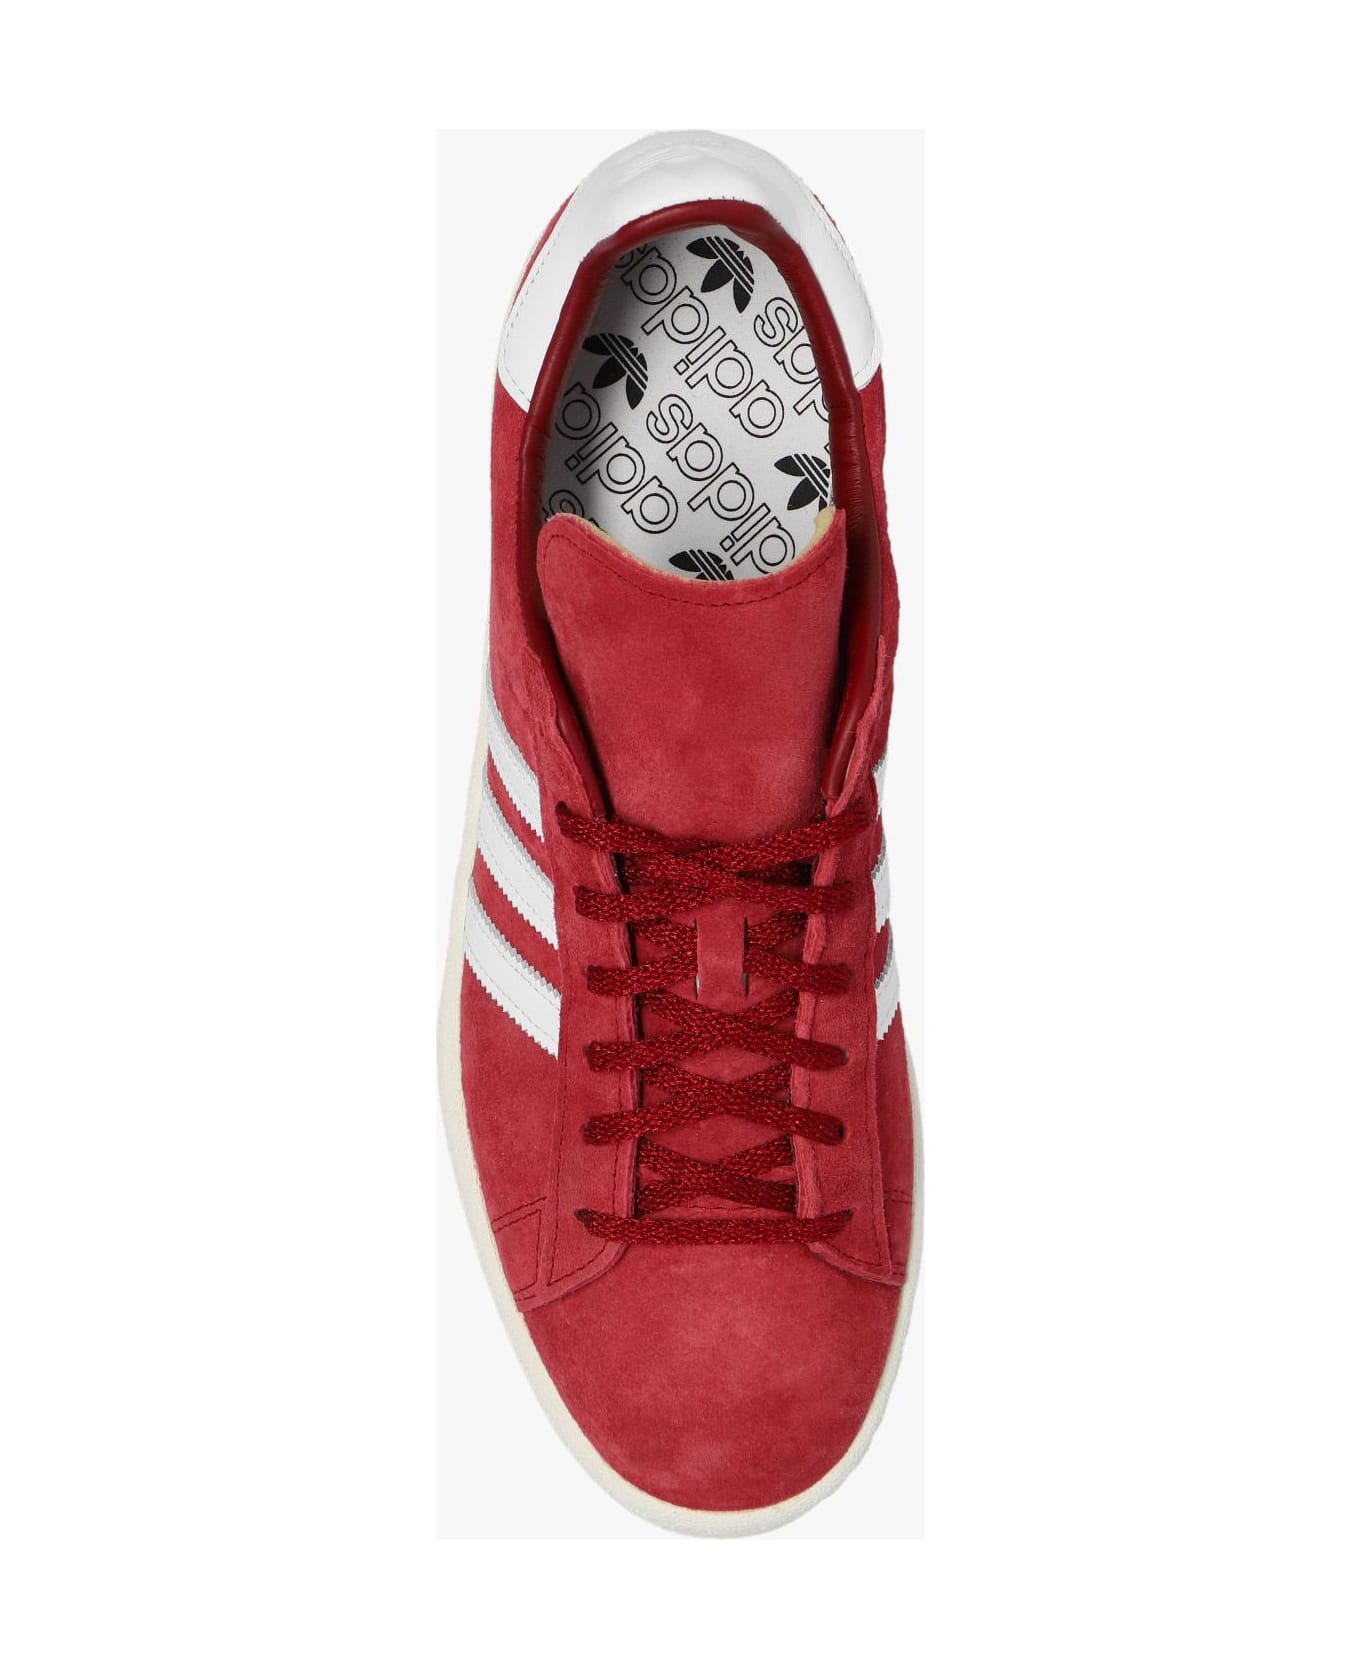 Adidas 'campus 80s' Sneakers - RED